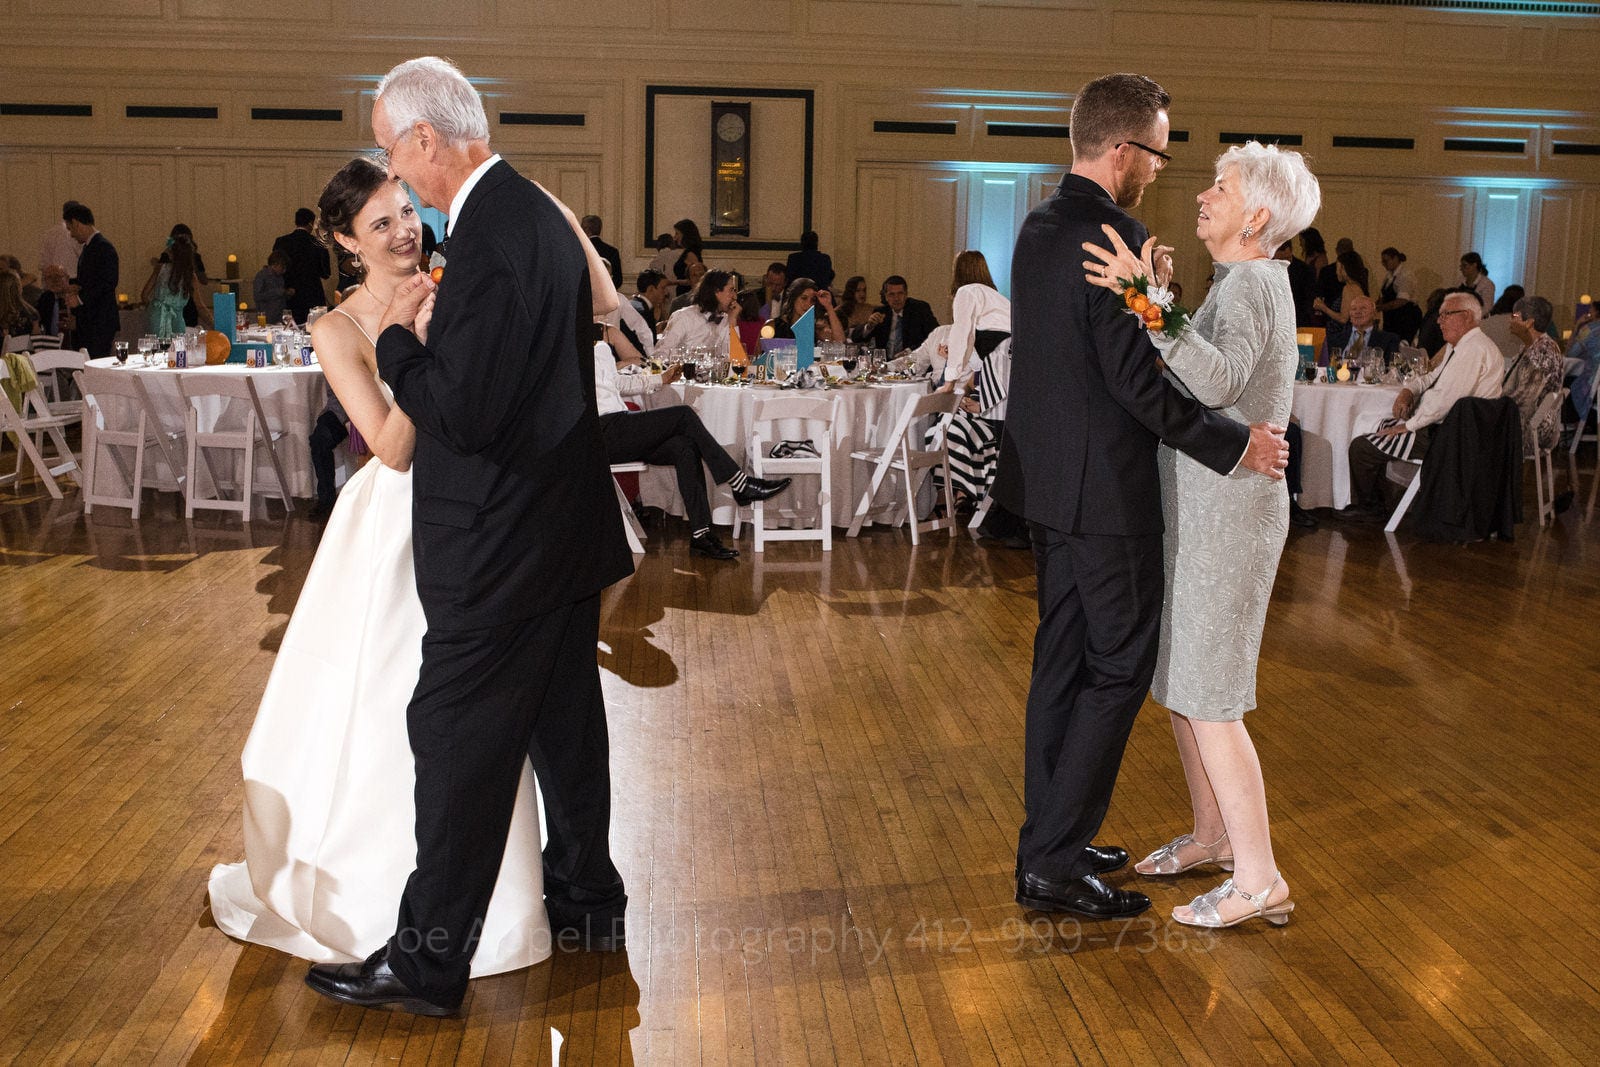 A bride dances with her father and a groom with his mother during Soldiers and Sailors Wedding Photos.